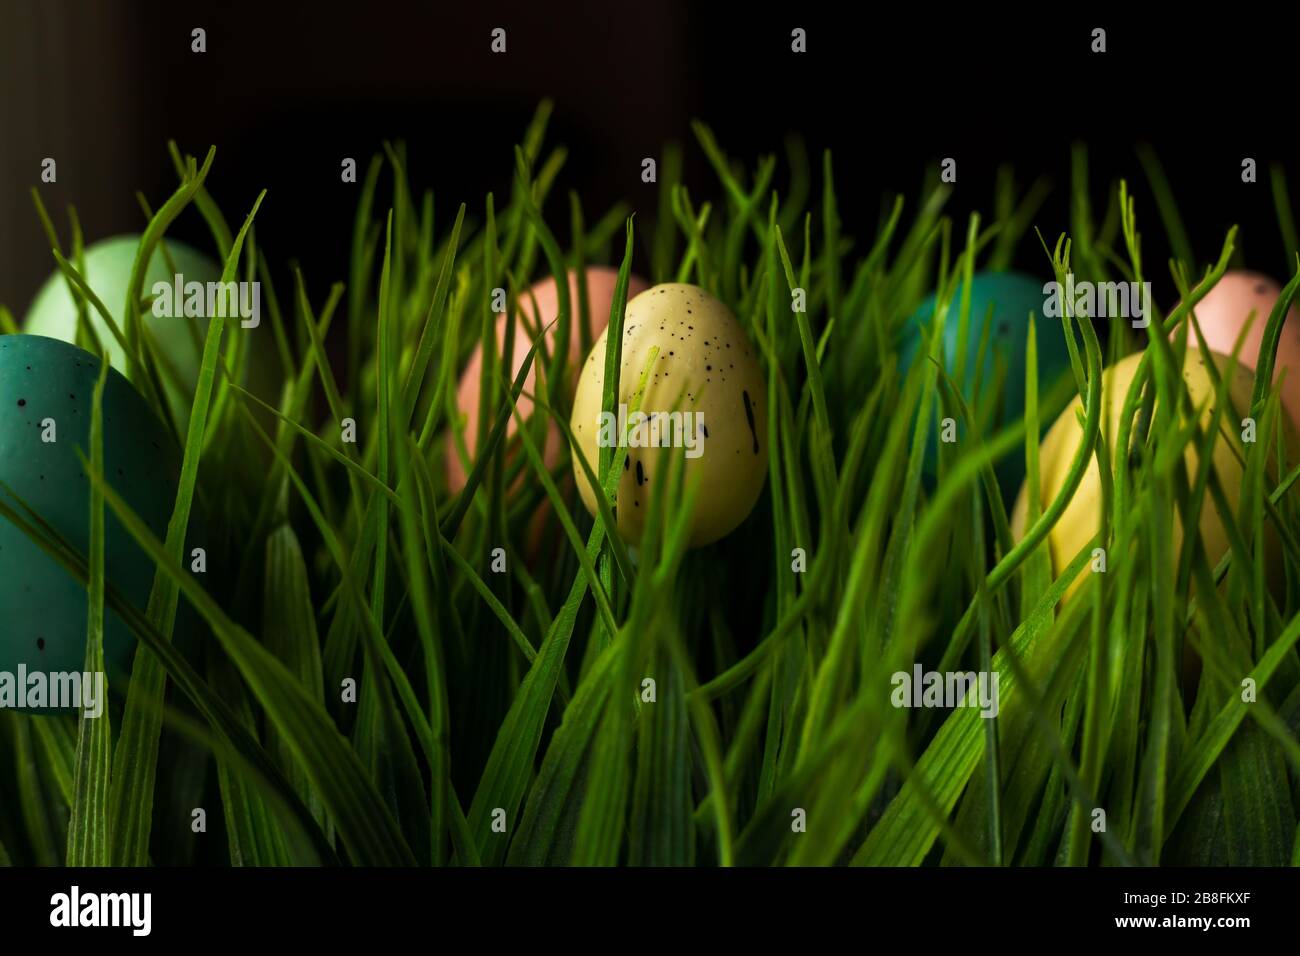 Pastel colored Easter eggs in green fake grass field decorative display background macro close up Stock Photo